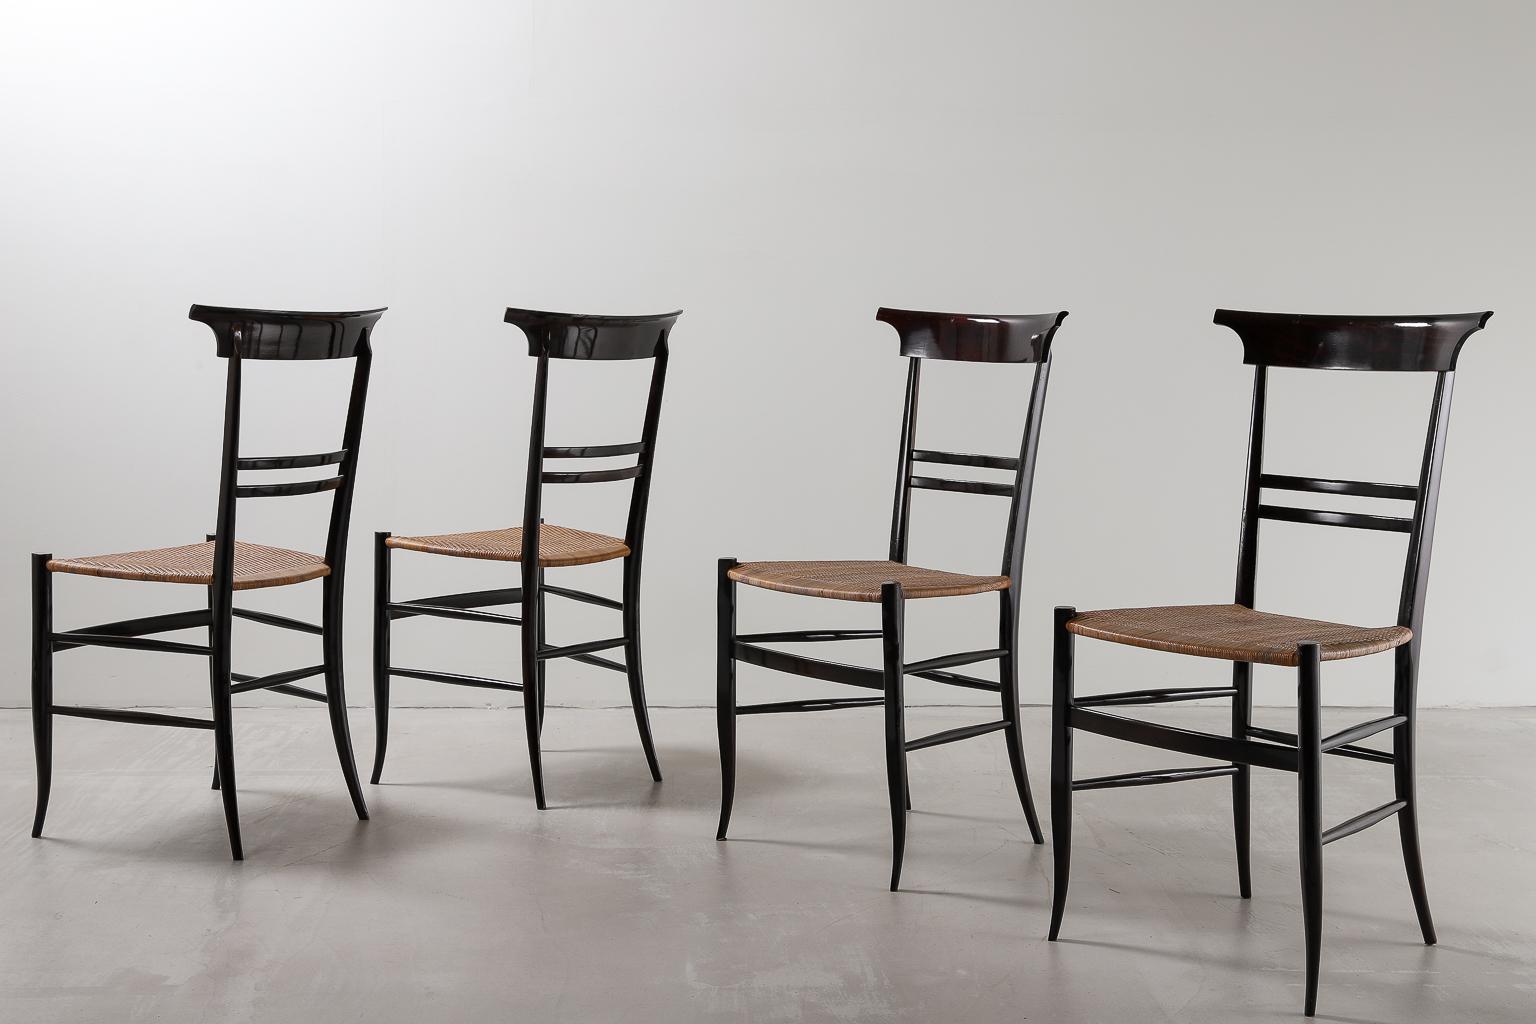 Italian Set of 4 Dining Chairs, Black Frame and Cane Seat